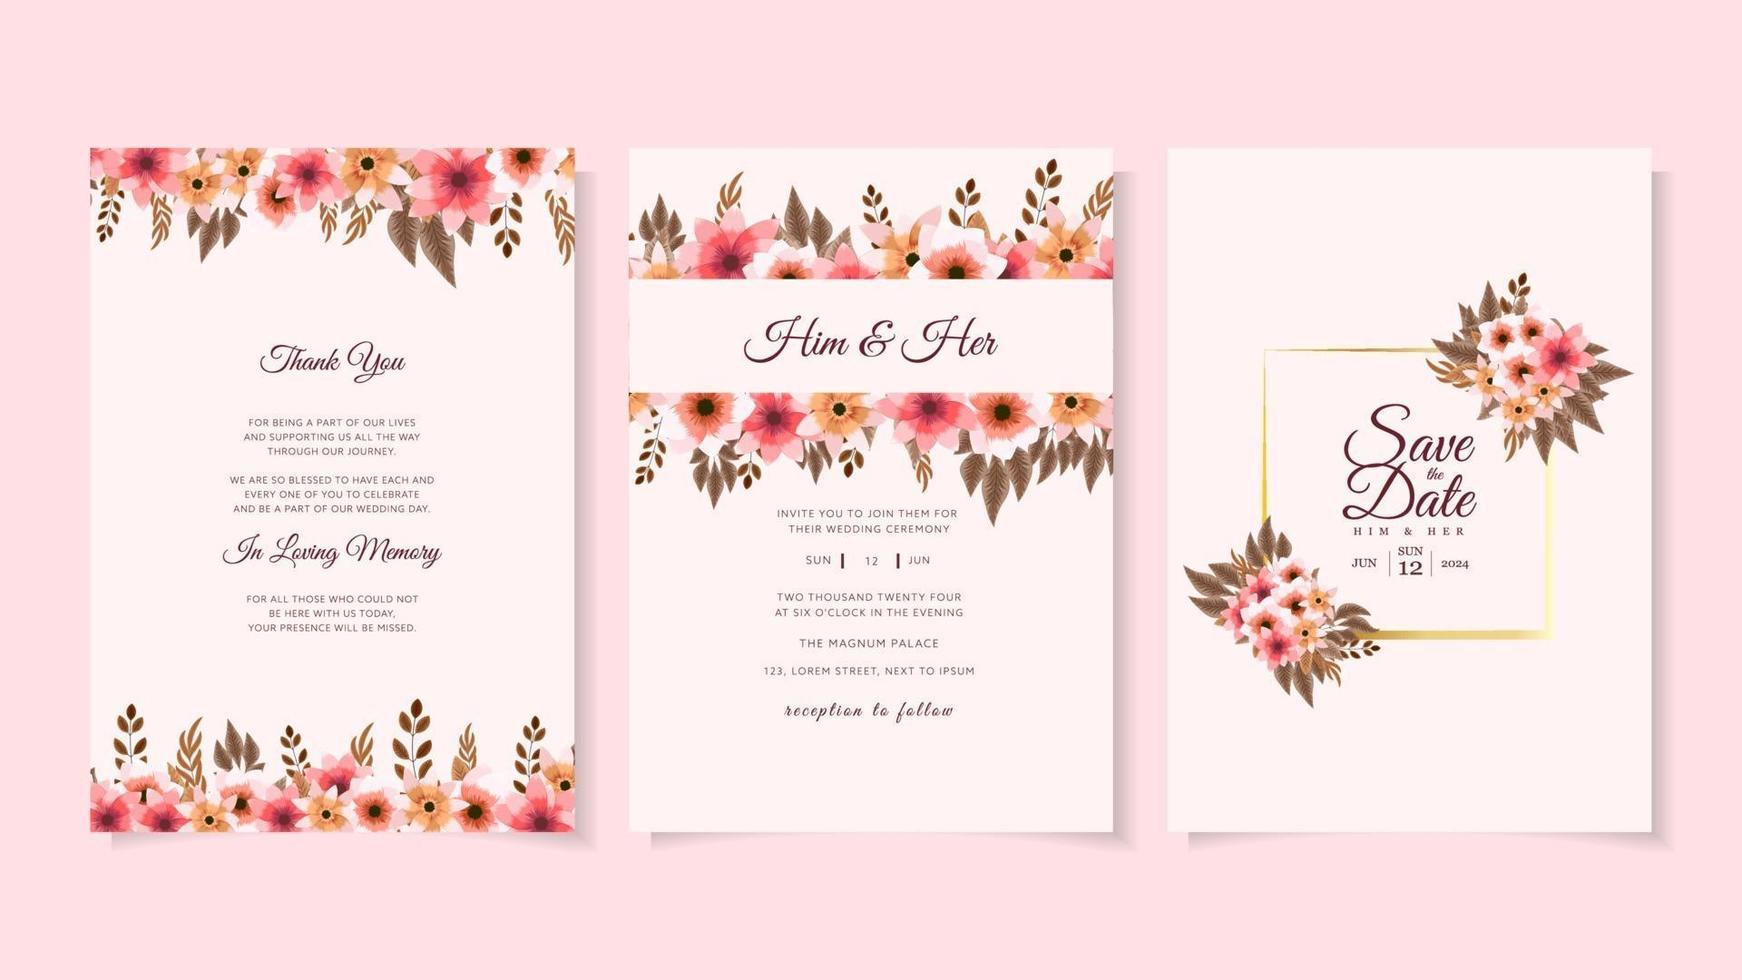 Floral Wedding card template flowers botanic invite Save the date RSVP vector